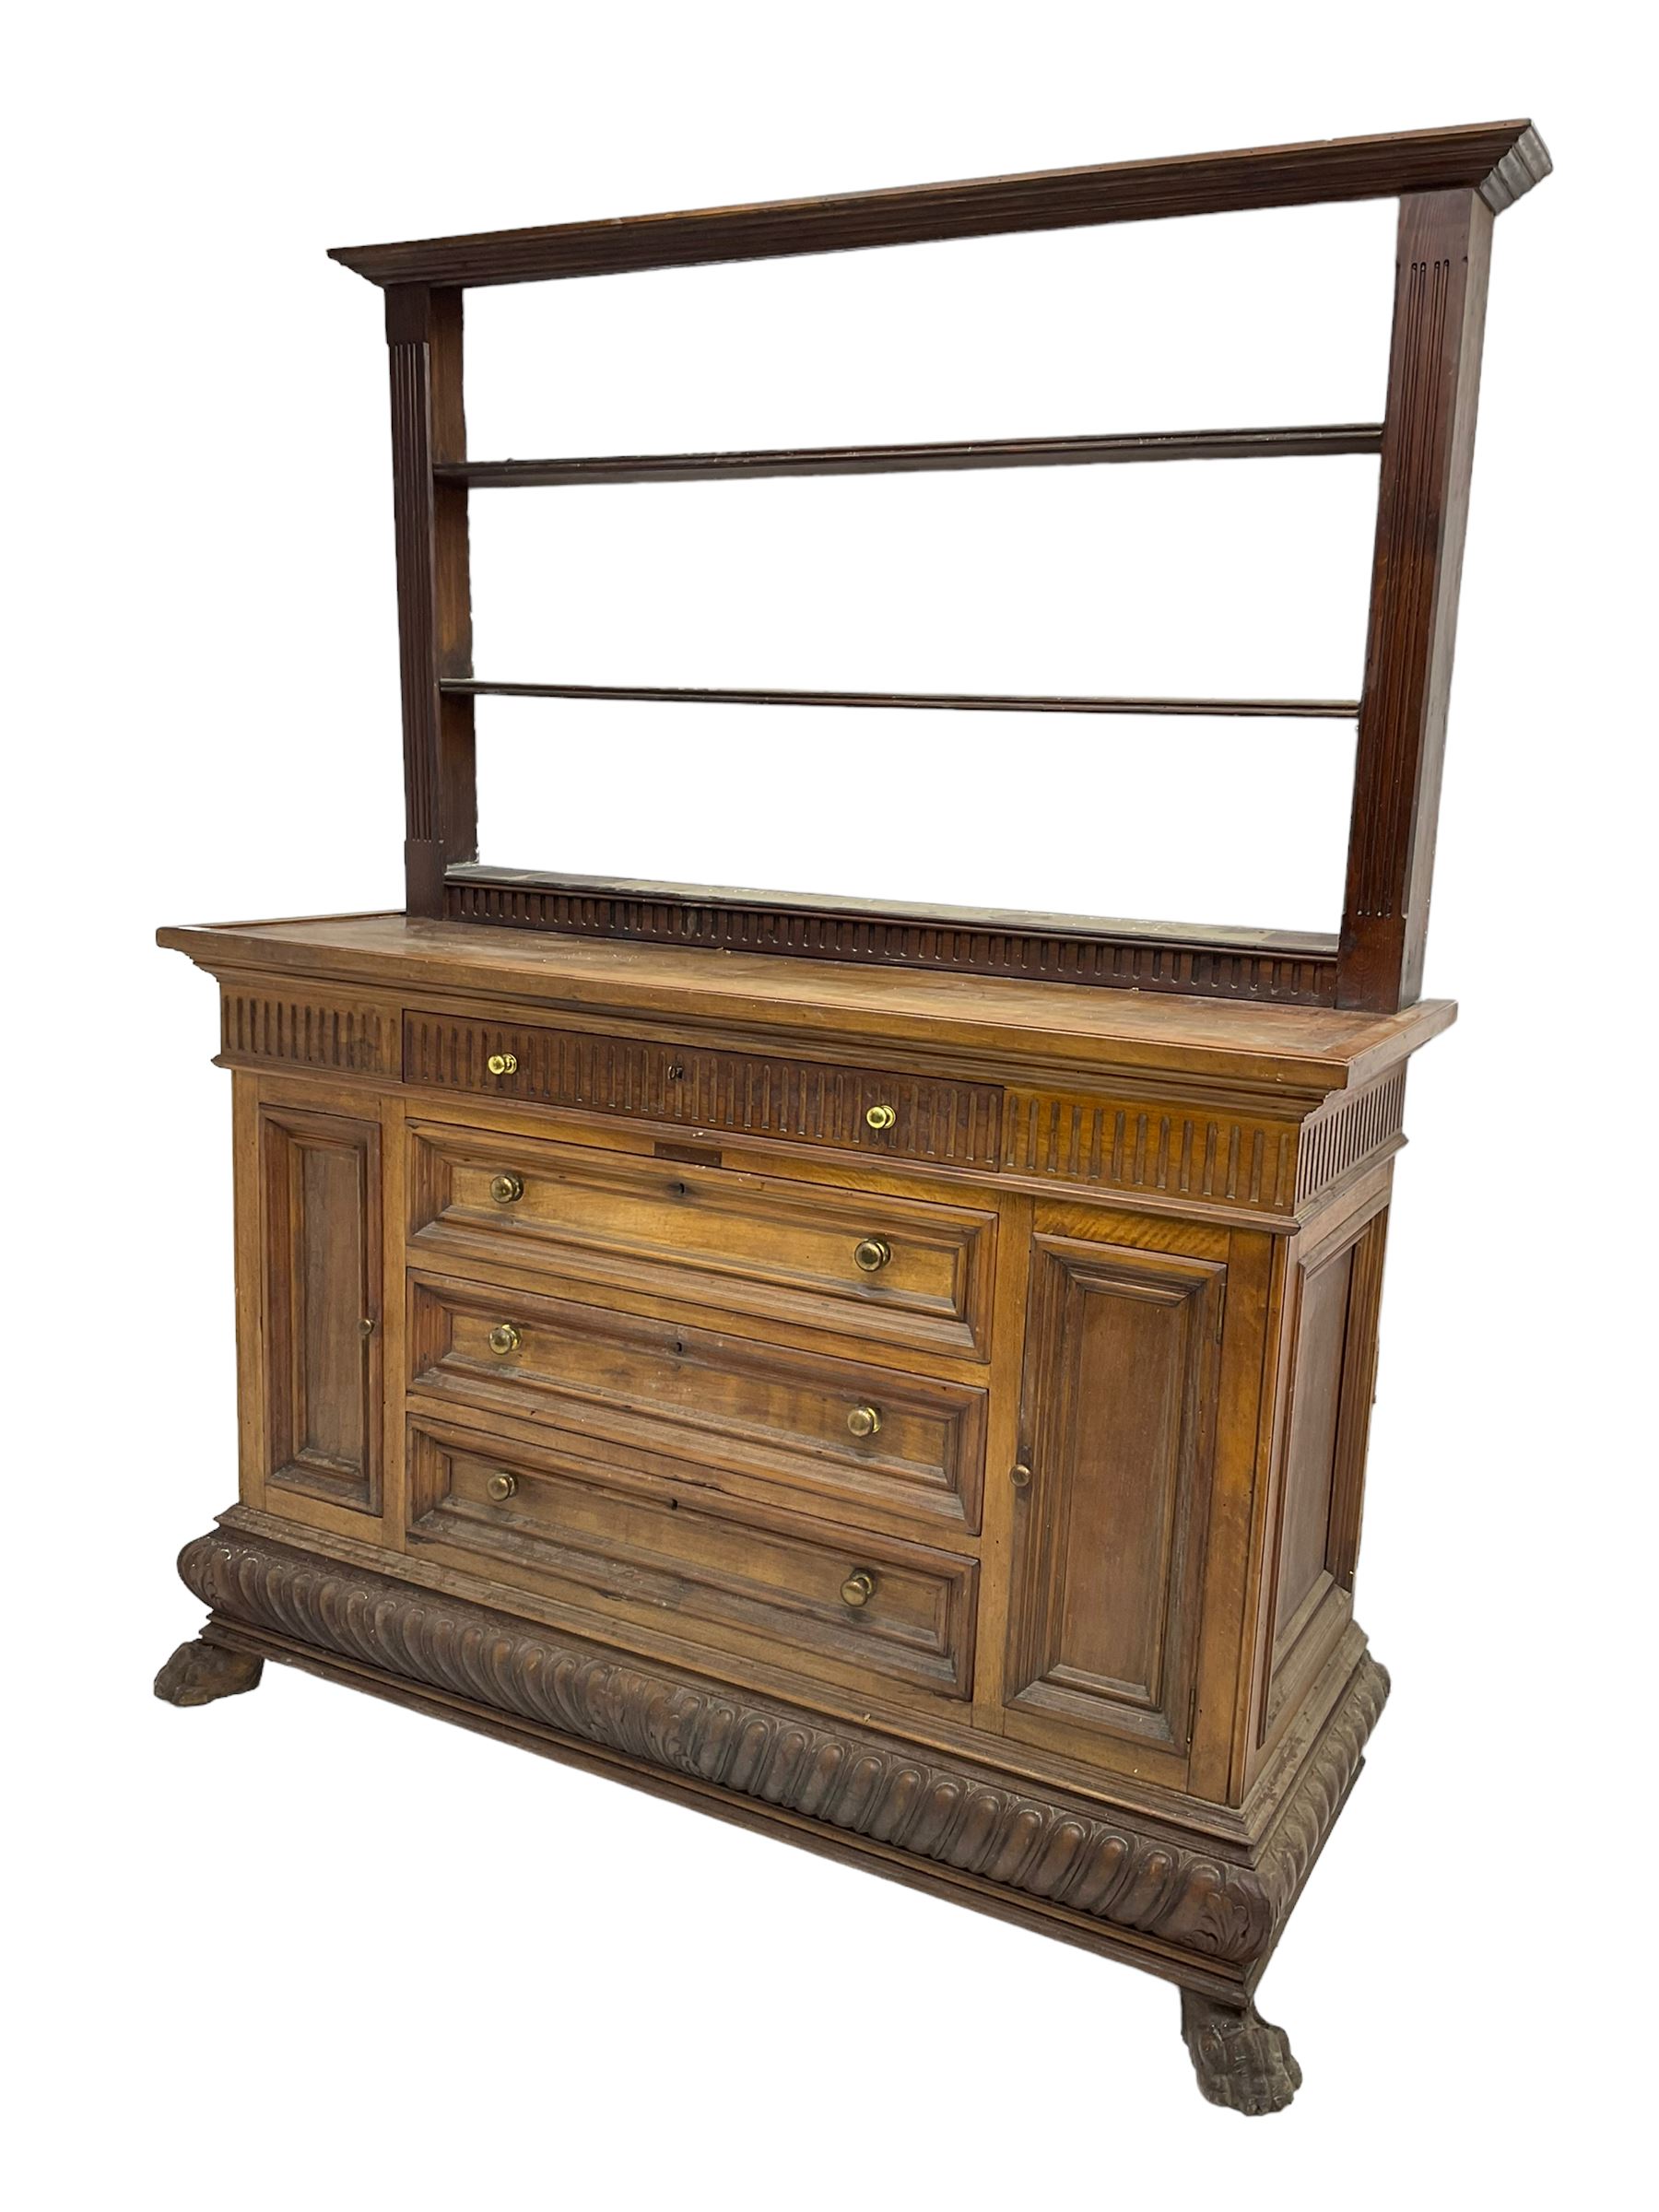 Early 20th century walnut side cabinet - Image 6 of 6